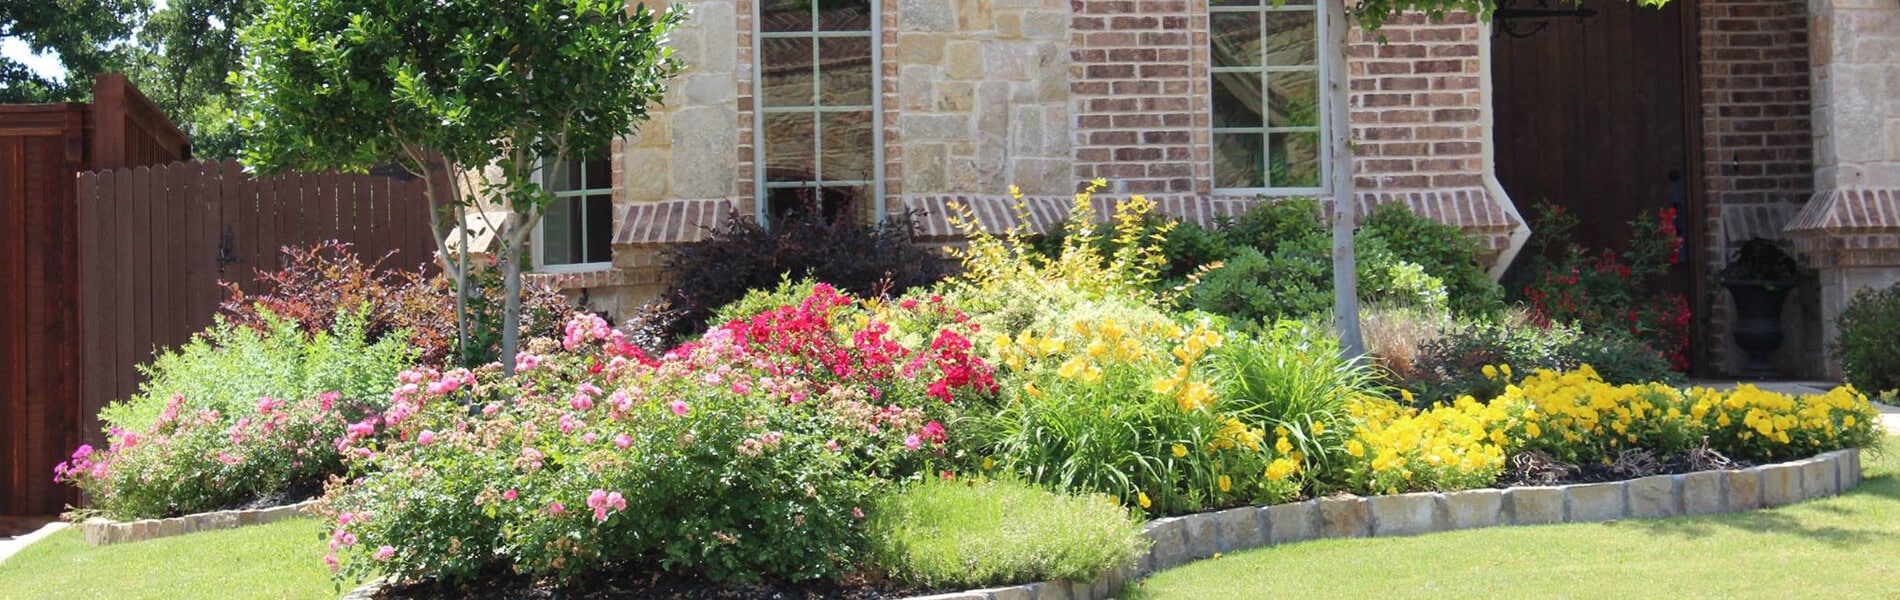 Green Earth Services Of Tx, Landscaping Garland Tx